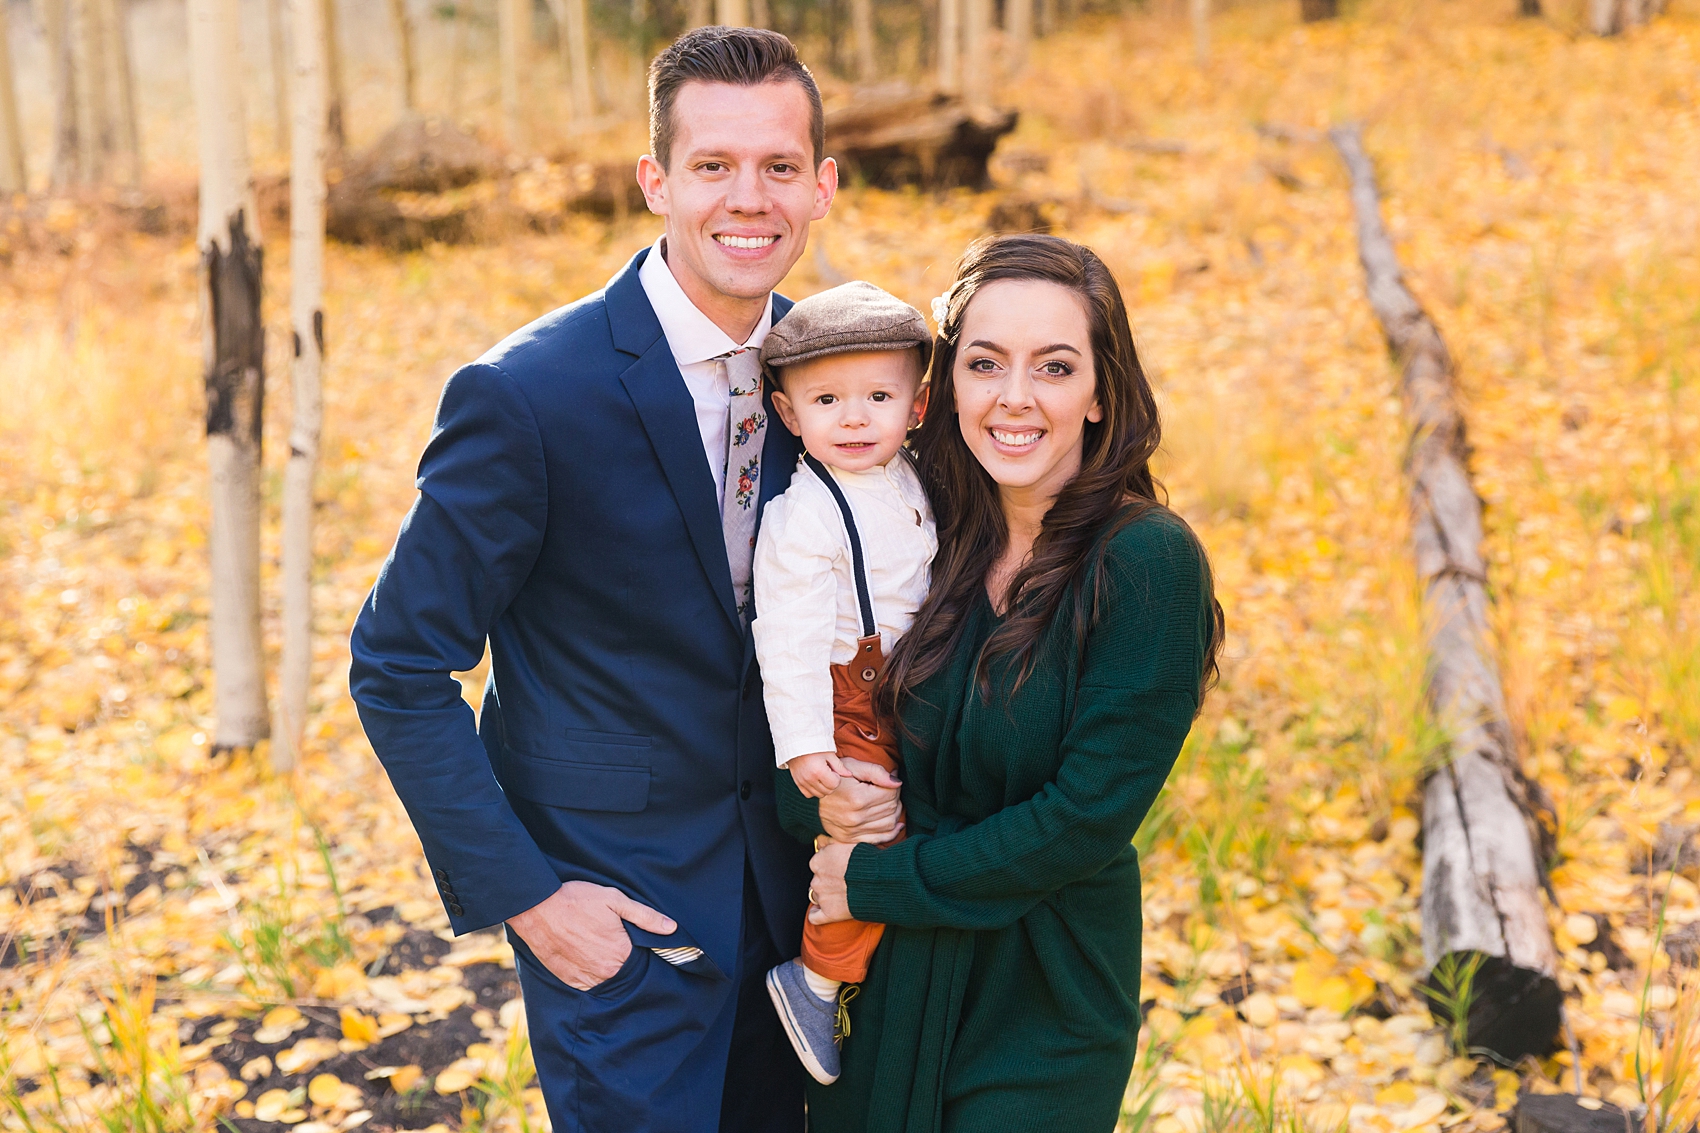 Leah Hope Photography | Flagstaff Arizona | Woods Forest Fall Family Pictures | What to Wear | Family Poses | Aspen Corner | Yellow Leaves Aspens